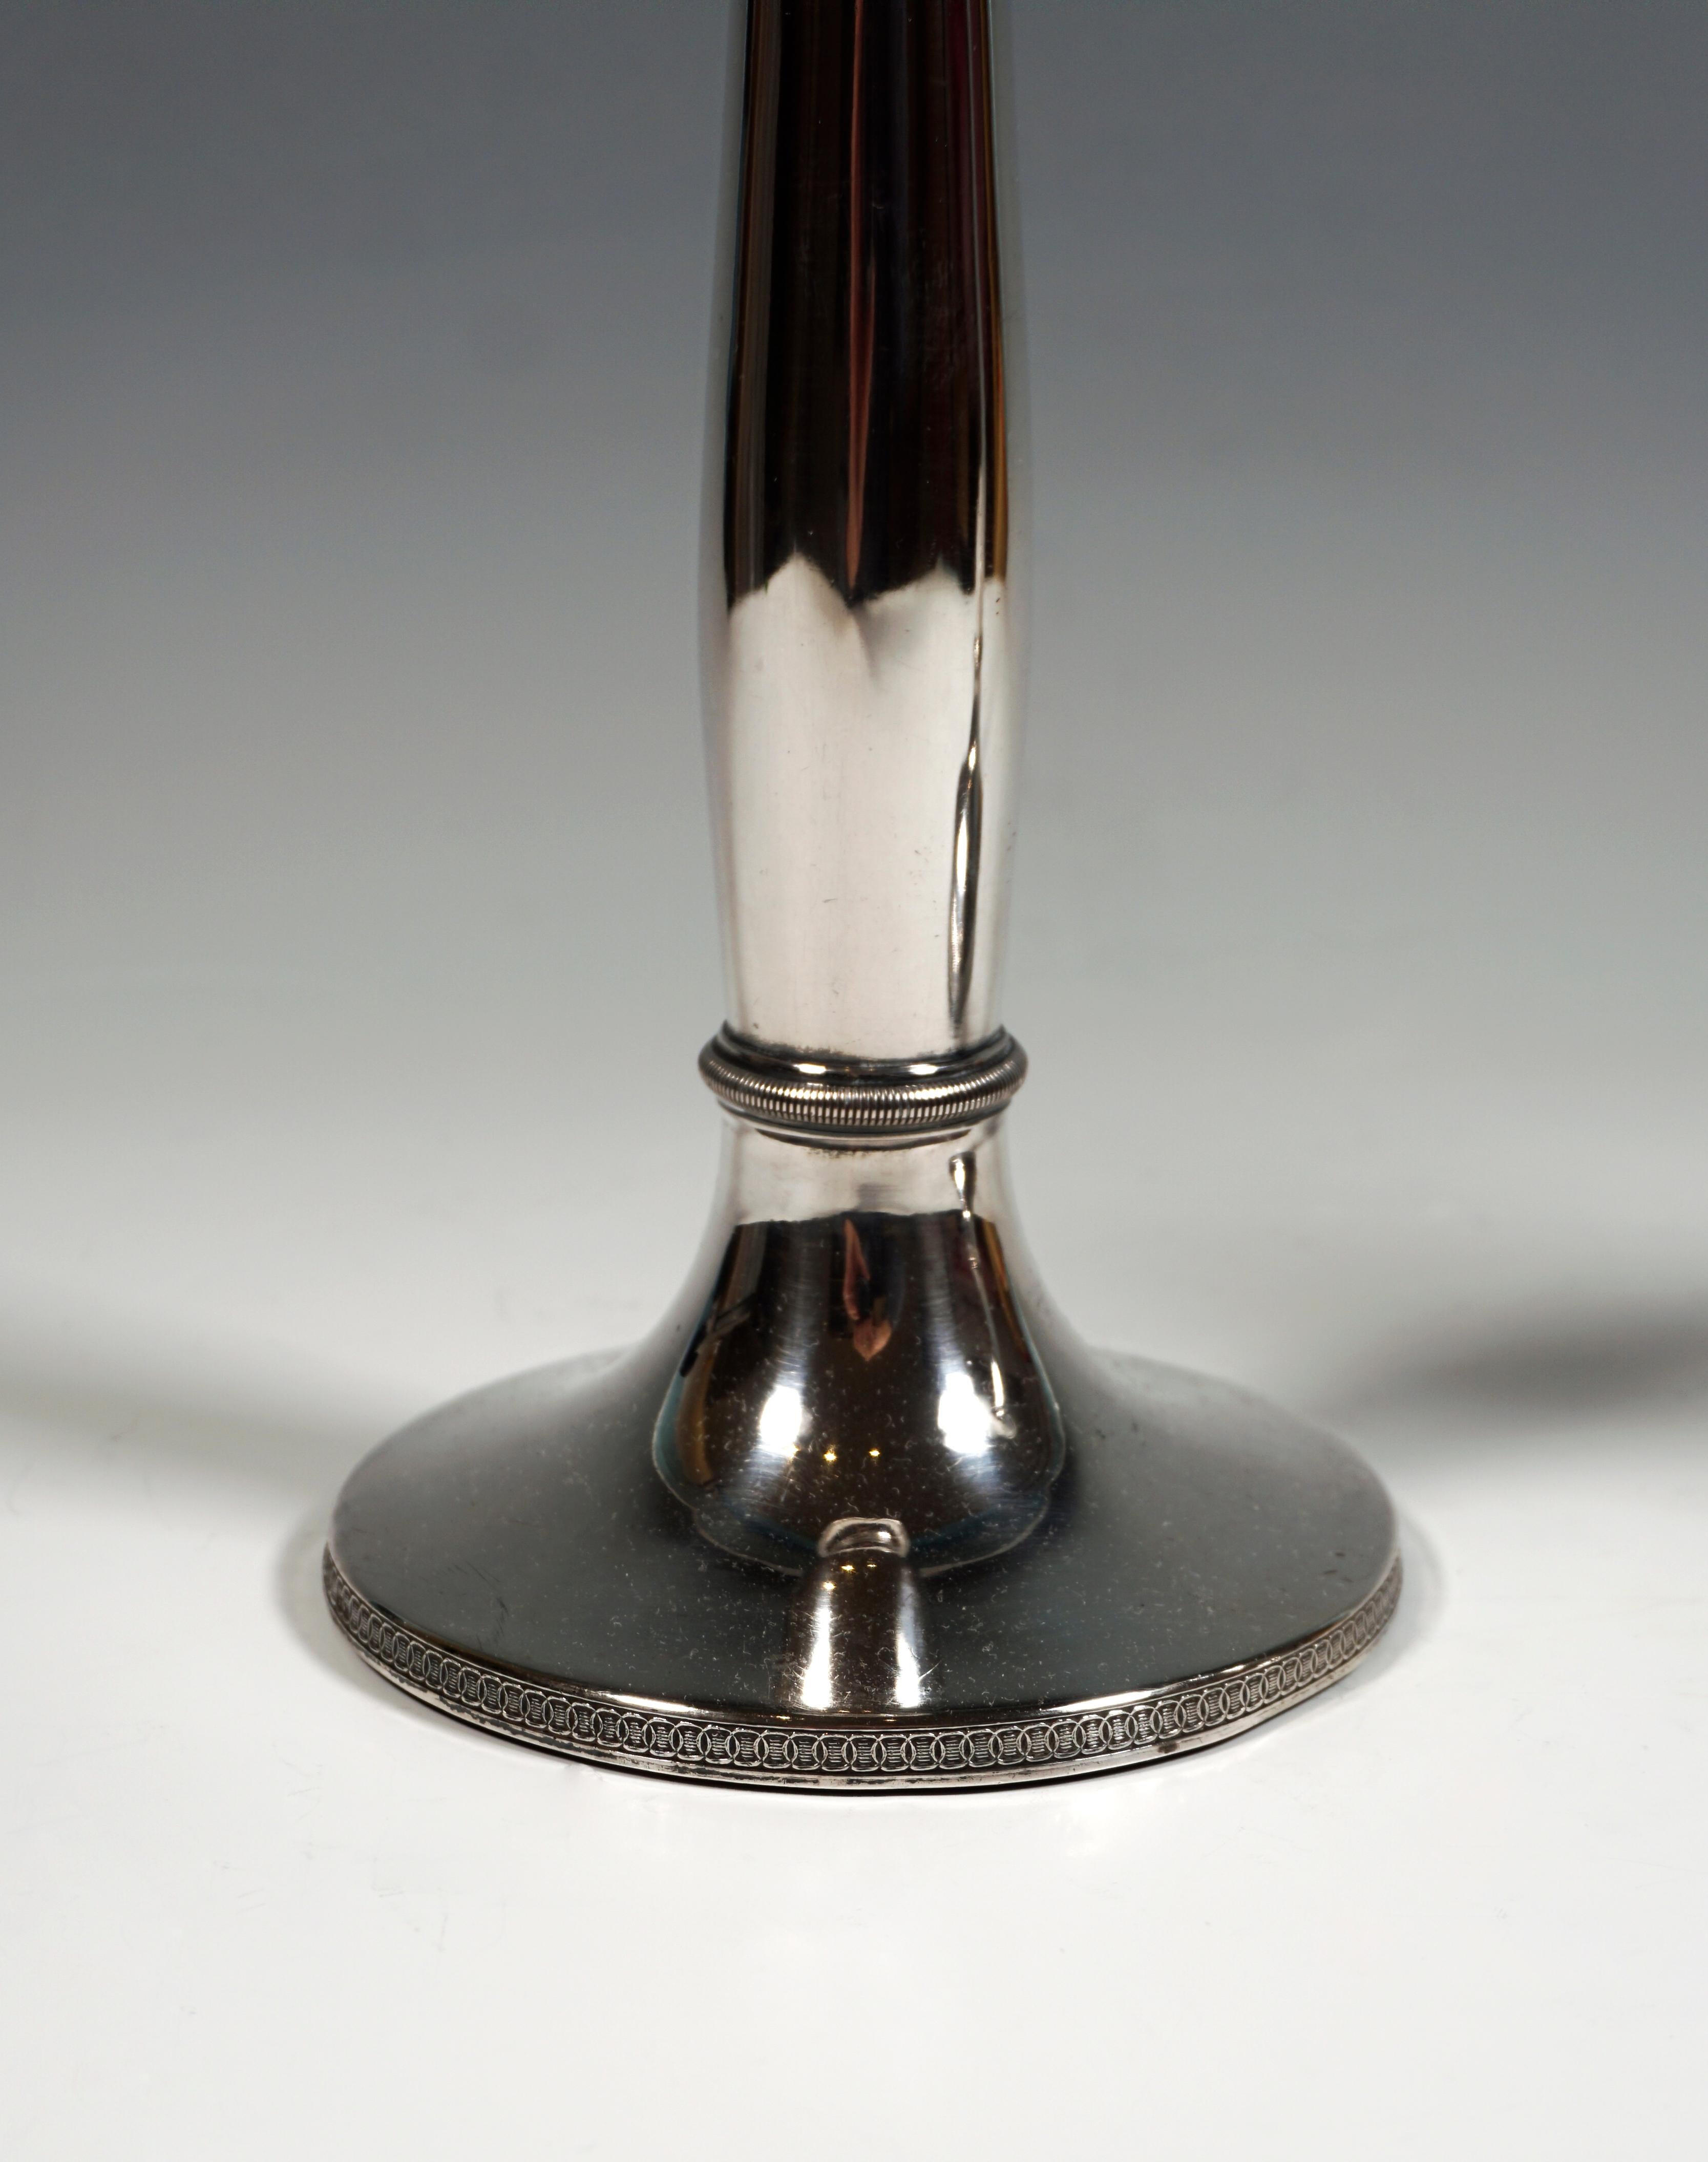 Biedermeier Pair of Antique Vienna Silver Candle Holders, by Stephan Mayerhofer, Dated 1826